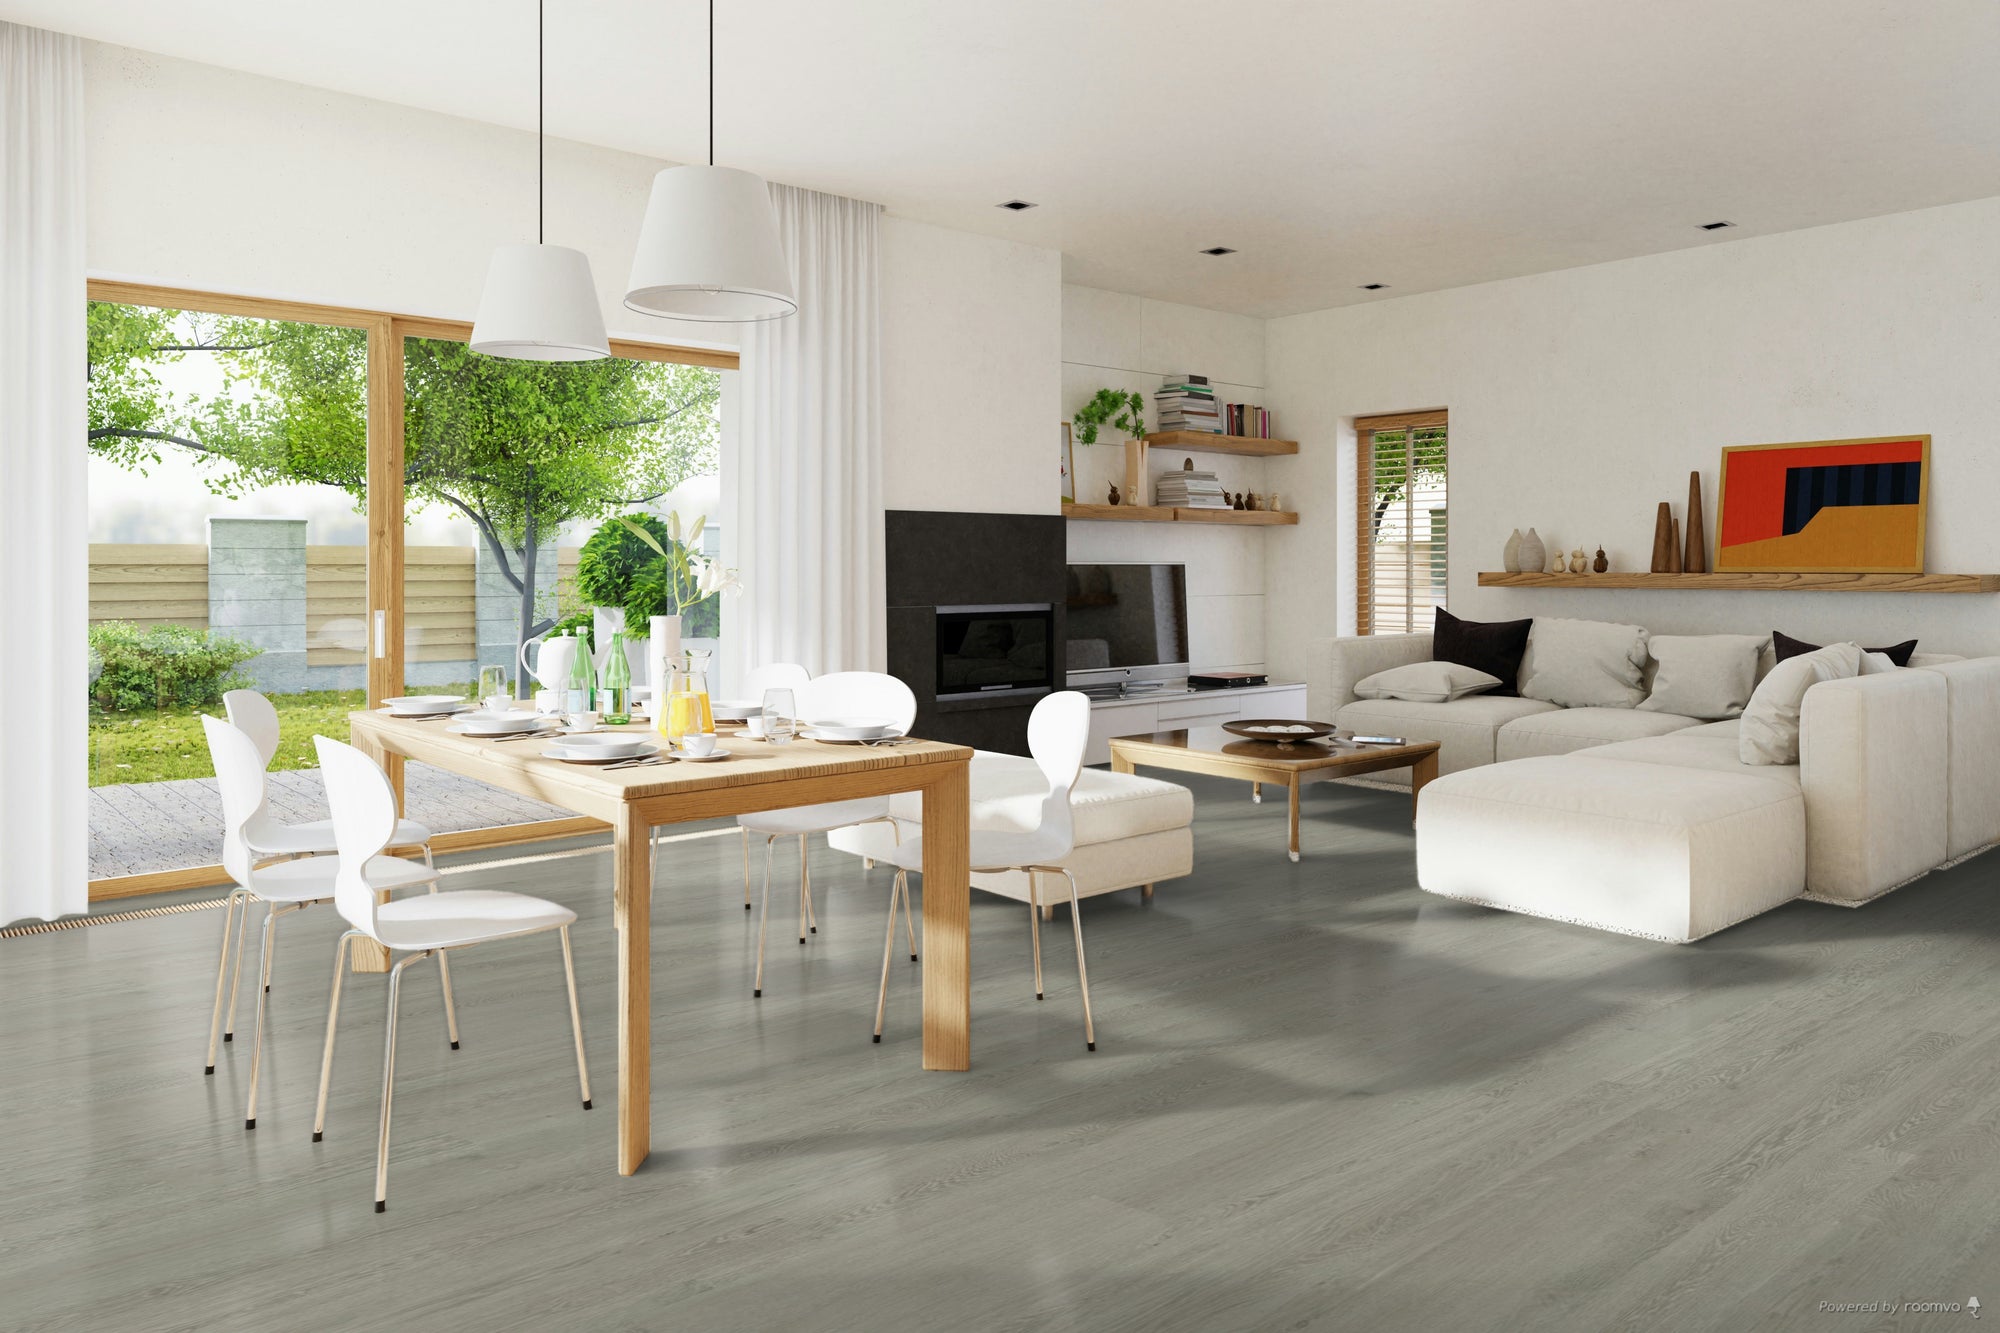 Engineered Floors - Atmosphere Collection - 7 in. x 48 in. - Galaxy